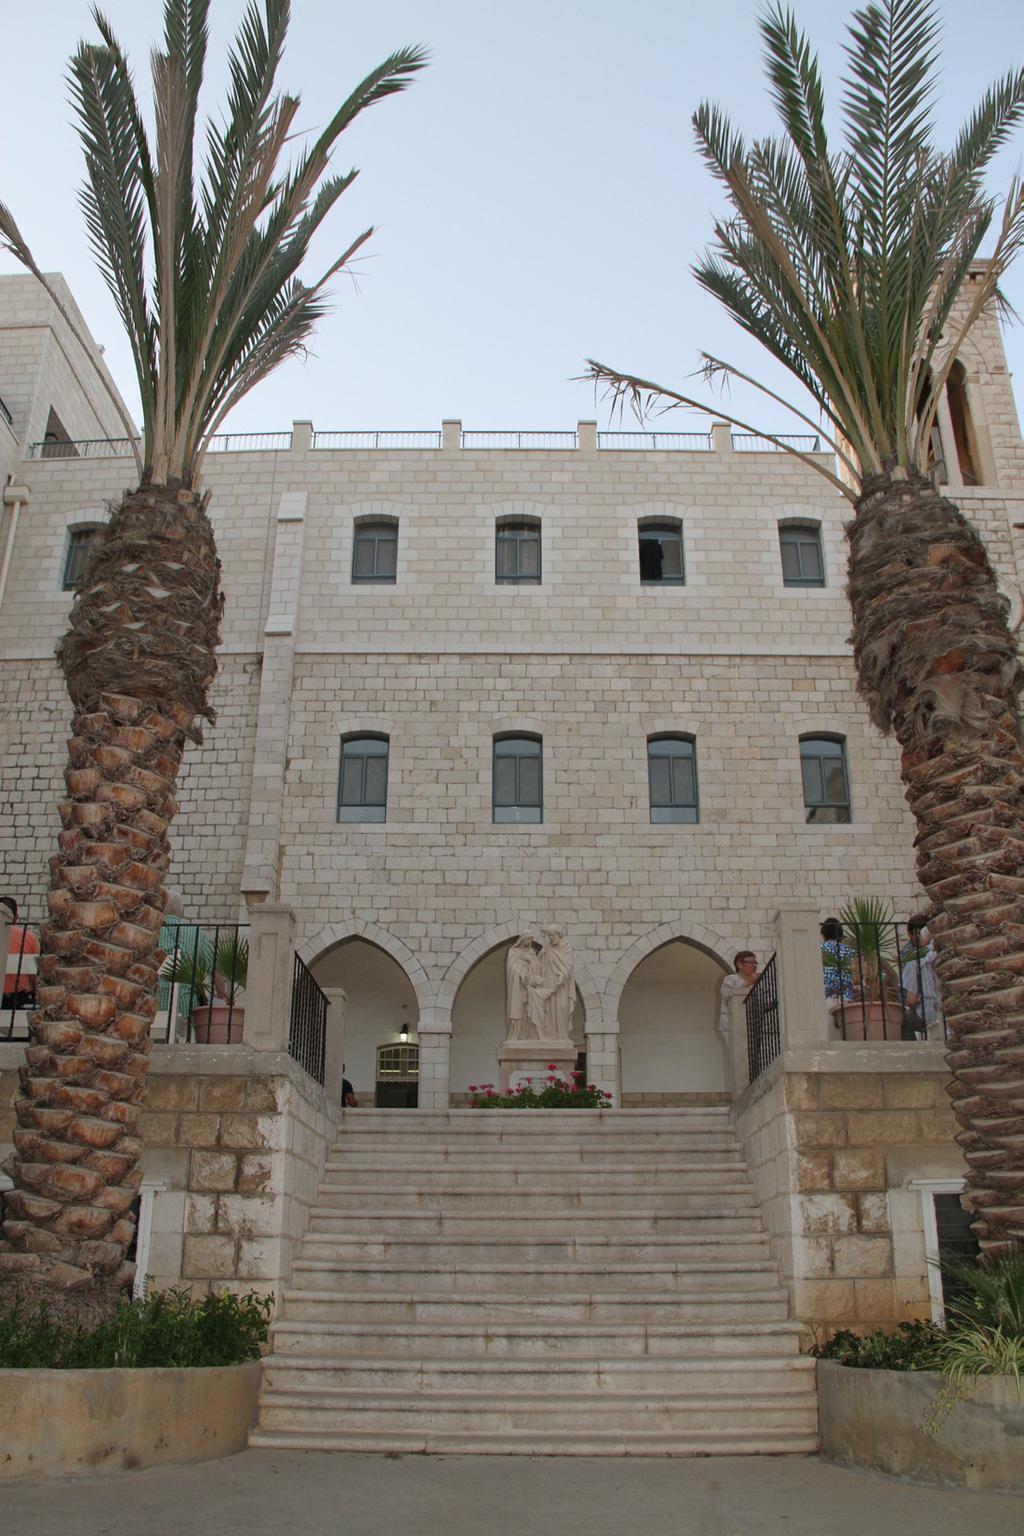 George s Pilgrim Guest House on the cathedral close in East Jerusalem, and the Sisters of Nazareth Guesthouse in Nazareth. Both are traditional, clean, modest, and extremely comfortable. The St.